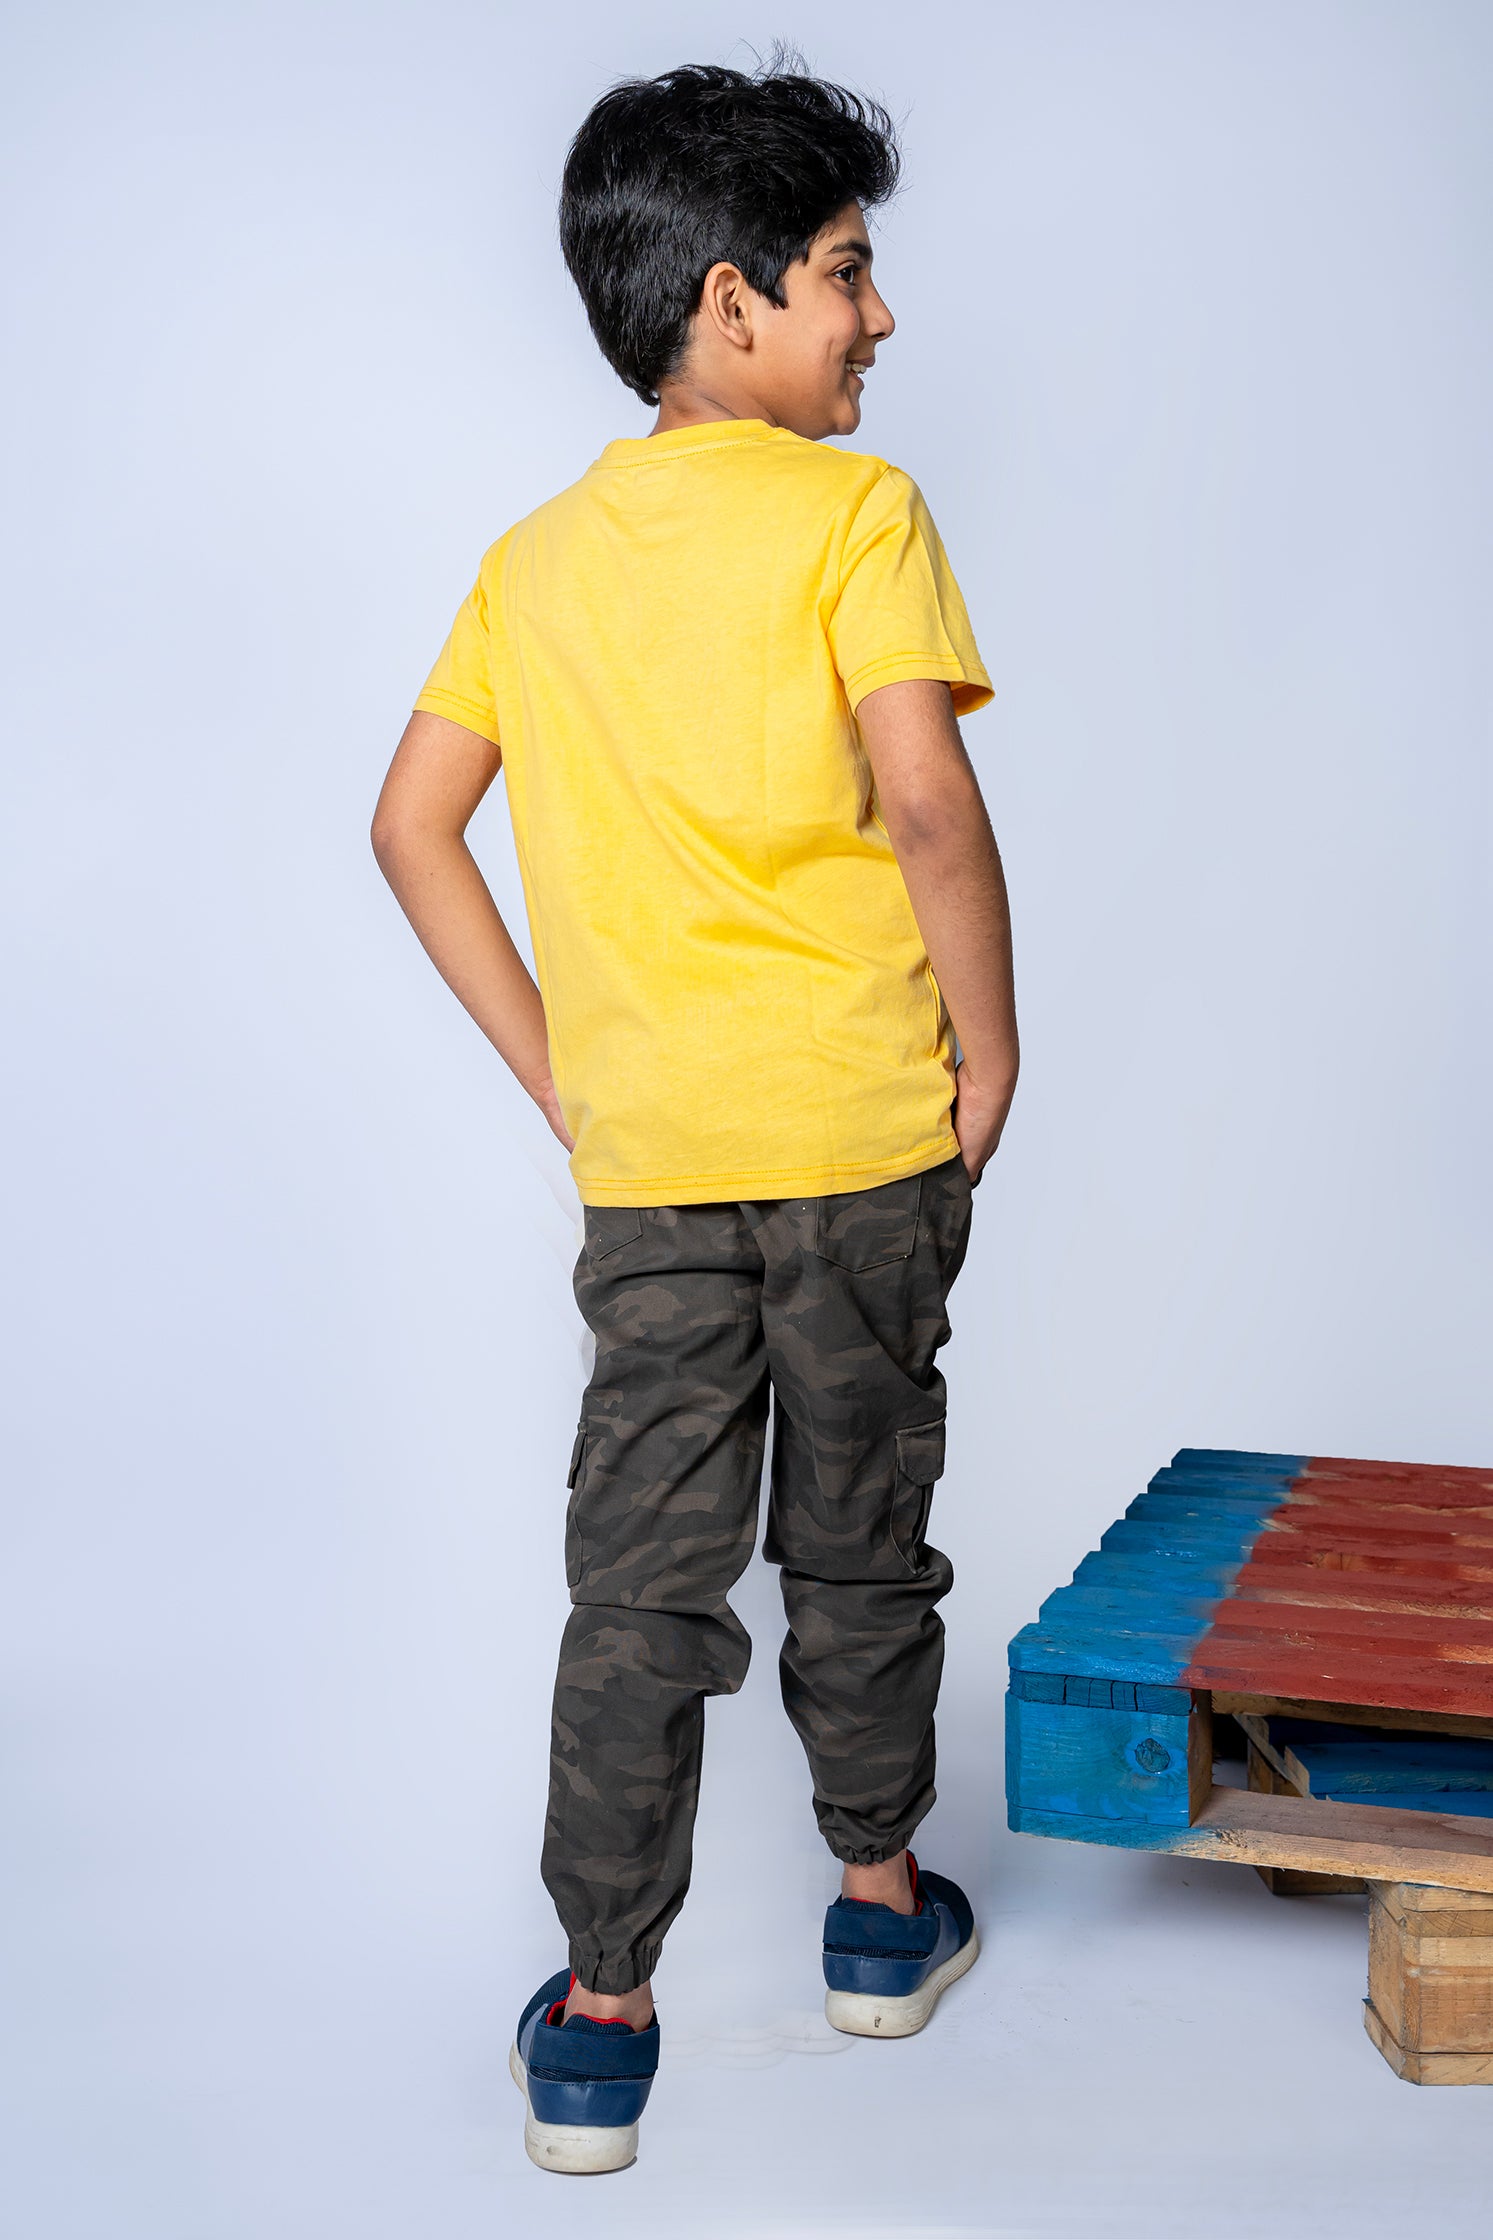 BOYS T-SHIRT MUSTARD WITH FRONT "HEY YEAH" PRINTING